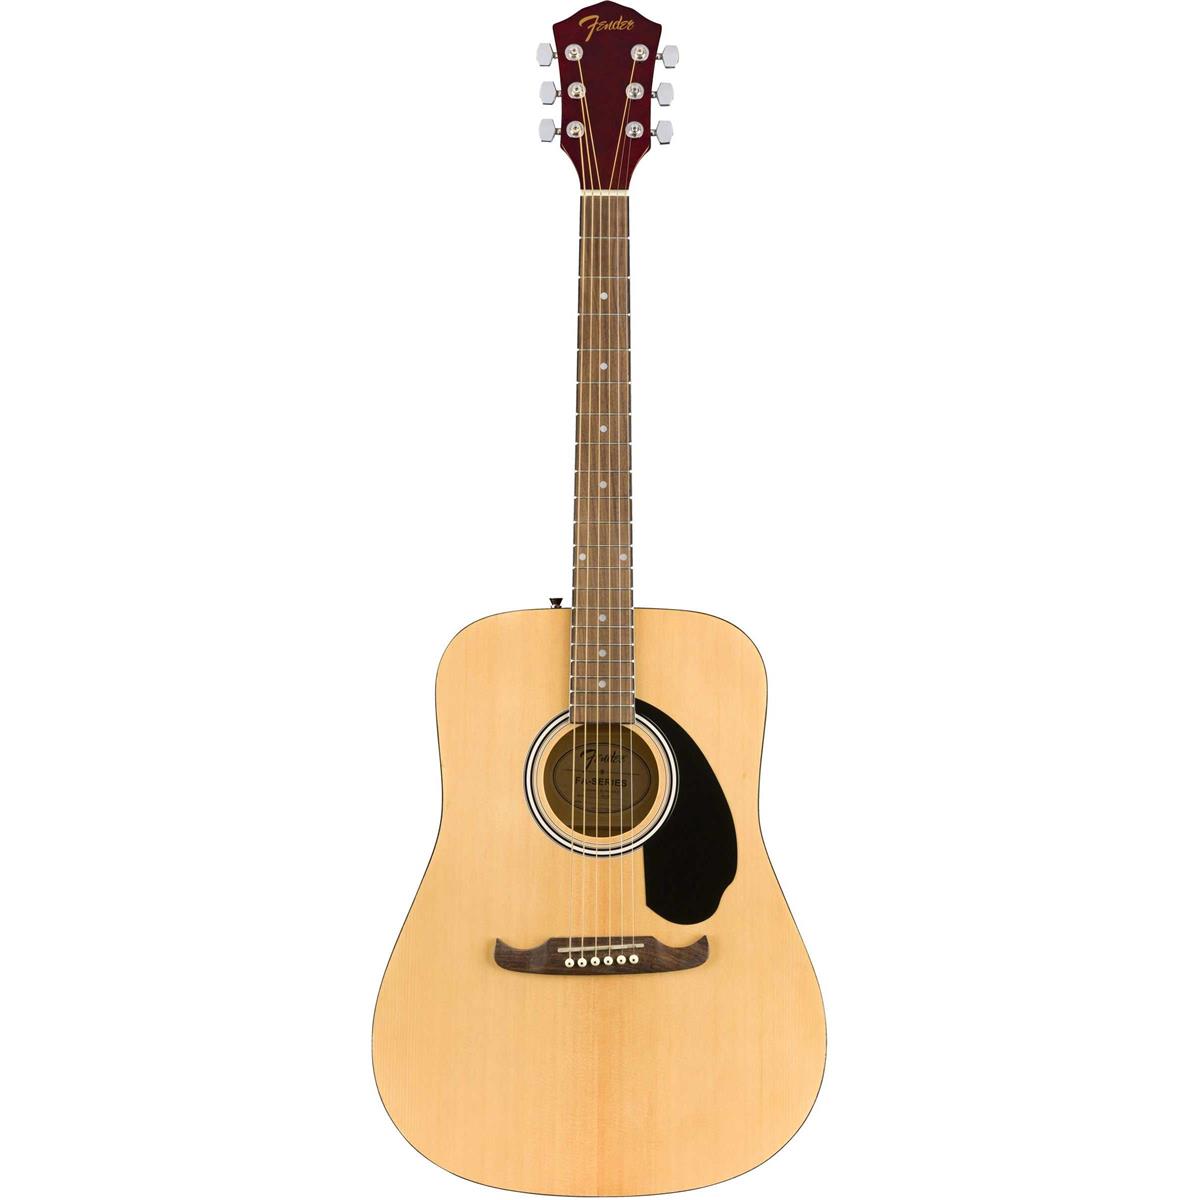 Fender FA-125 Dreadnought Acoustic Guitar with Gig Bag, Natural -  0971210521